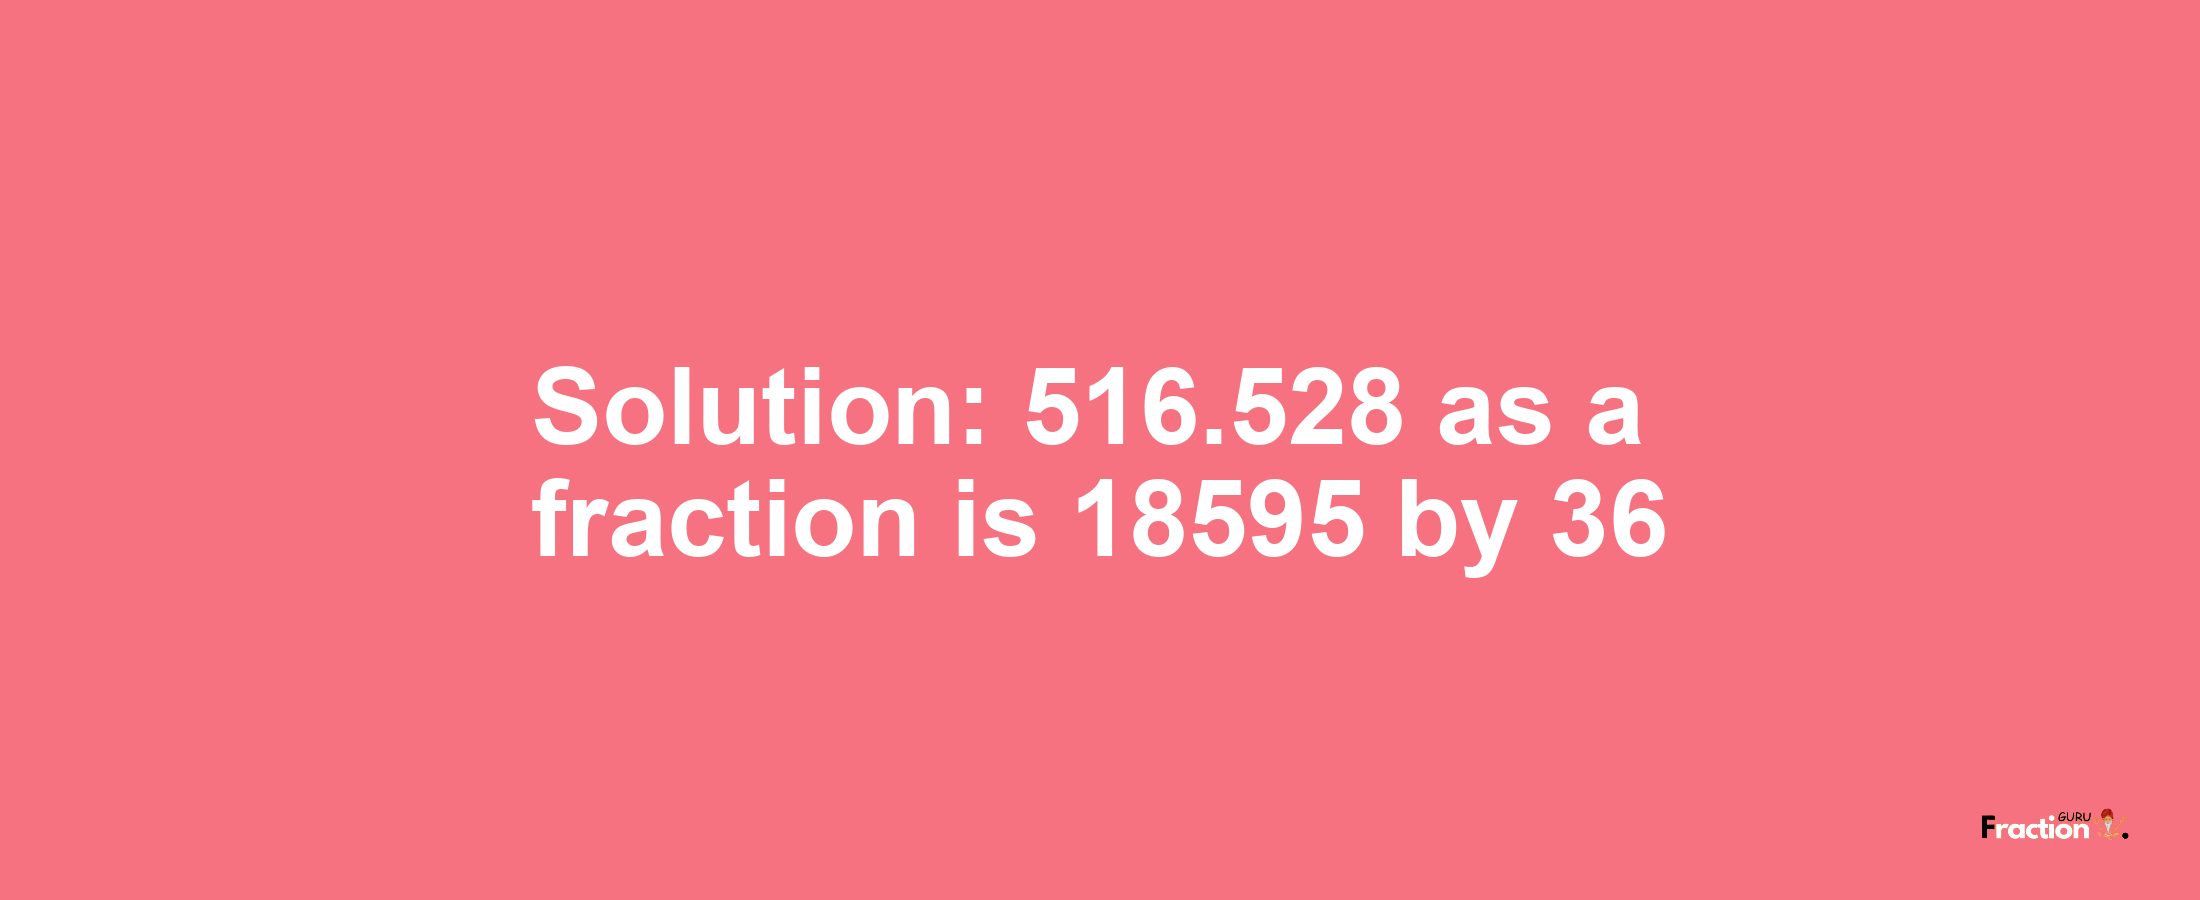 Solution:516.528 as a fraction is 18595/36